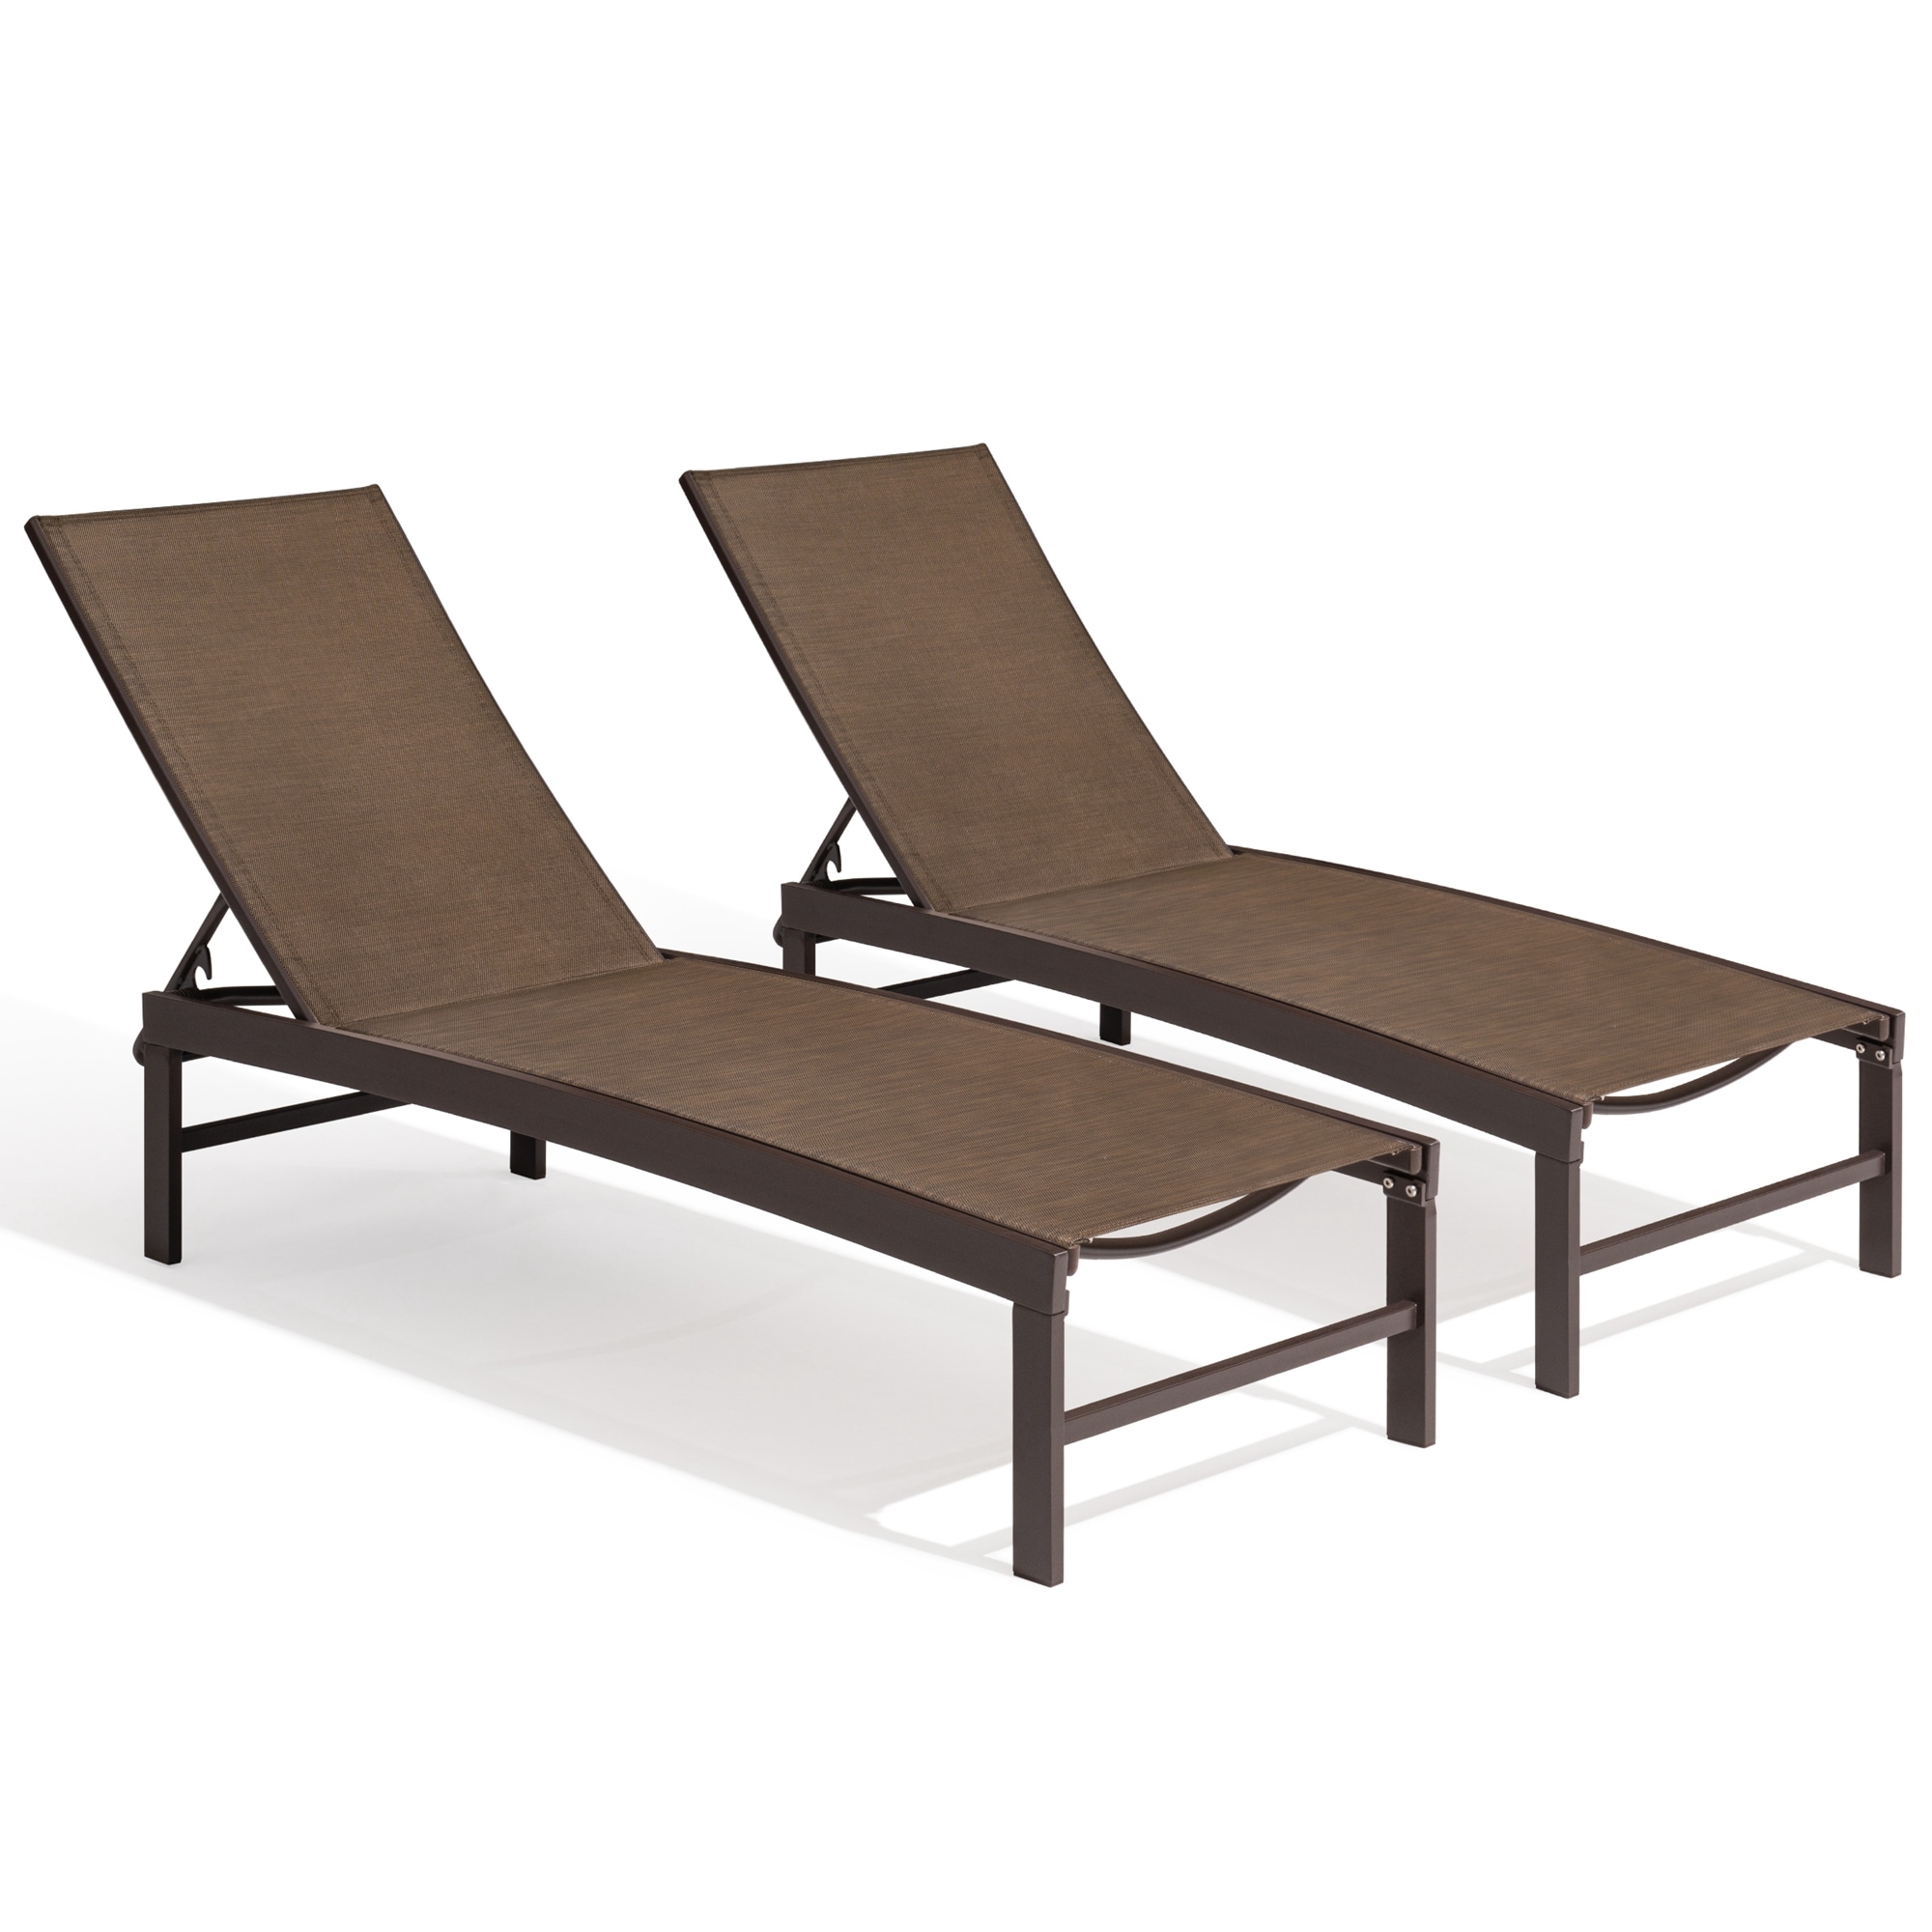 Crestlive Products Patio Chaise Lounge Set Of 2 Aluminum Frame In Brown  Finish Metal Frame Stationary Chaise Lounge Chair(S) With Brown Textilene  Fabric Sling Seat In The Patio Chairs Department At Lowes.Com